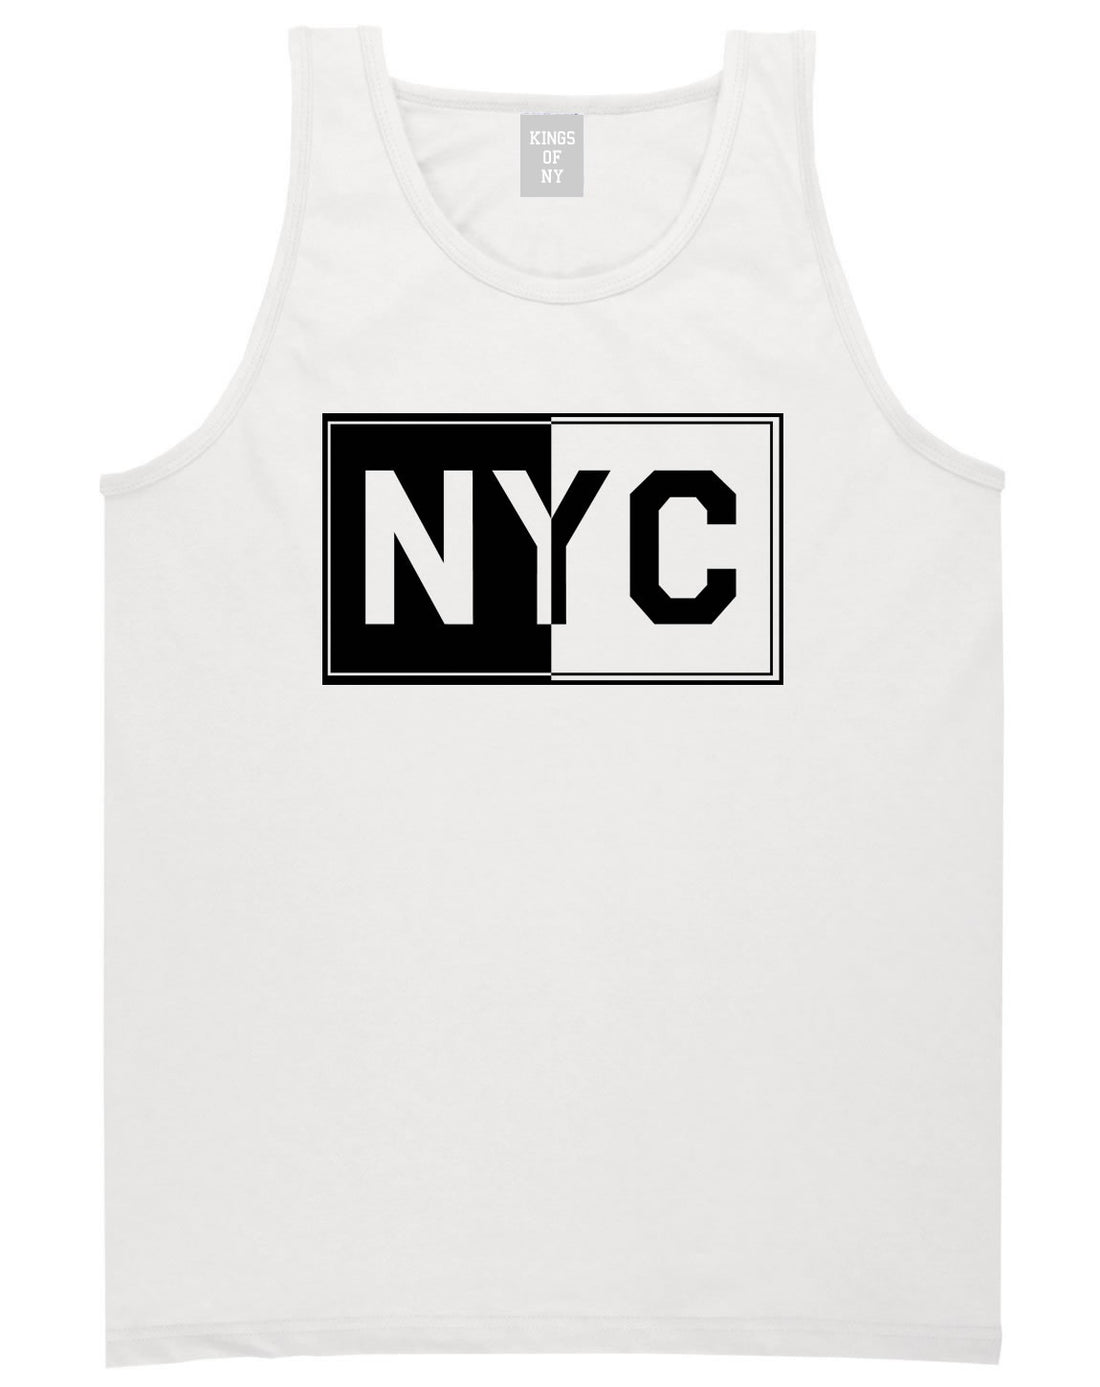 NYC Rectangle New York City Tank Top in White By Kings Of NY